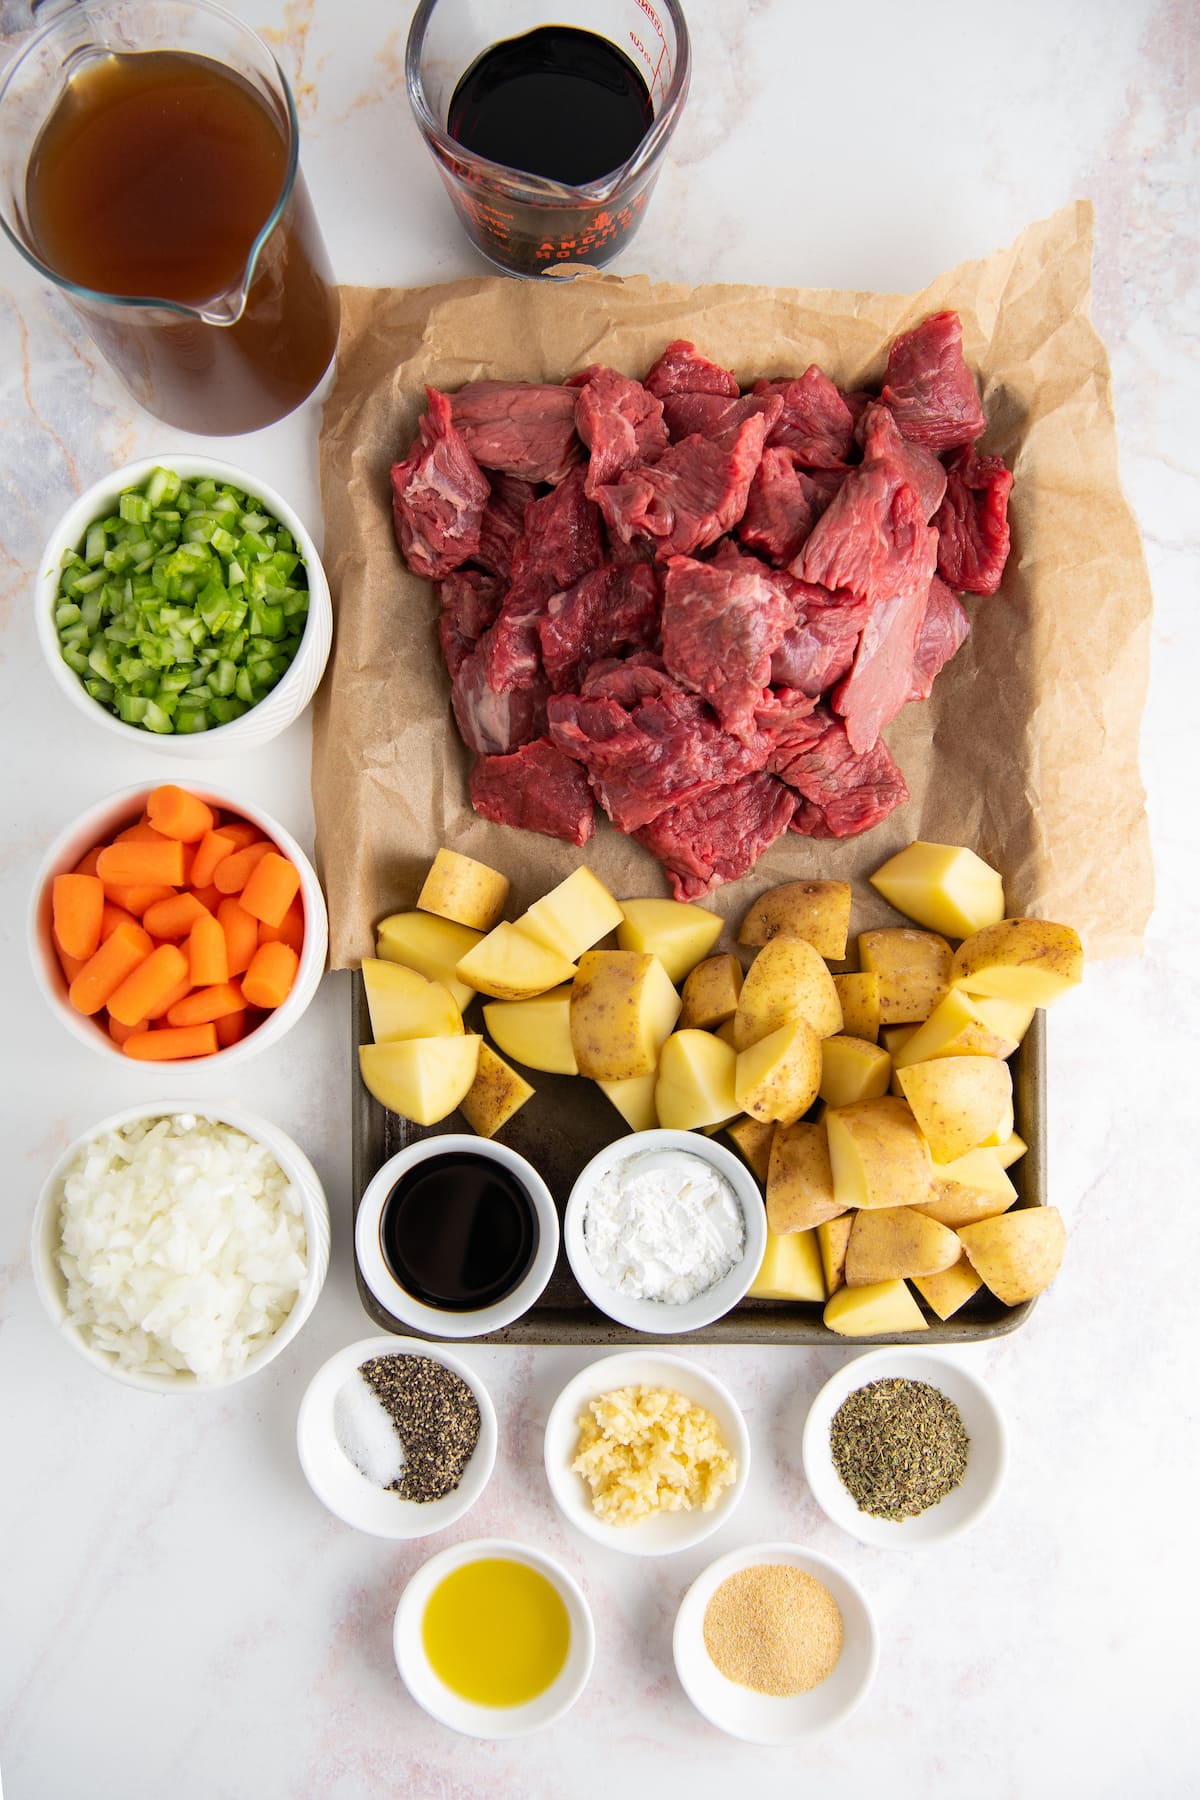 All the ingredients needed to make Instant Pot Beef Stew.